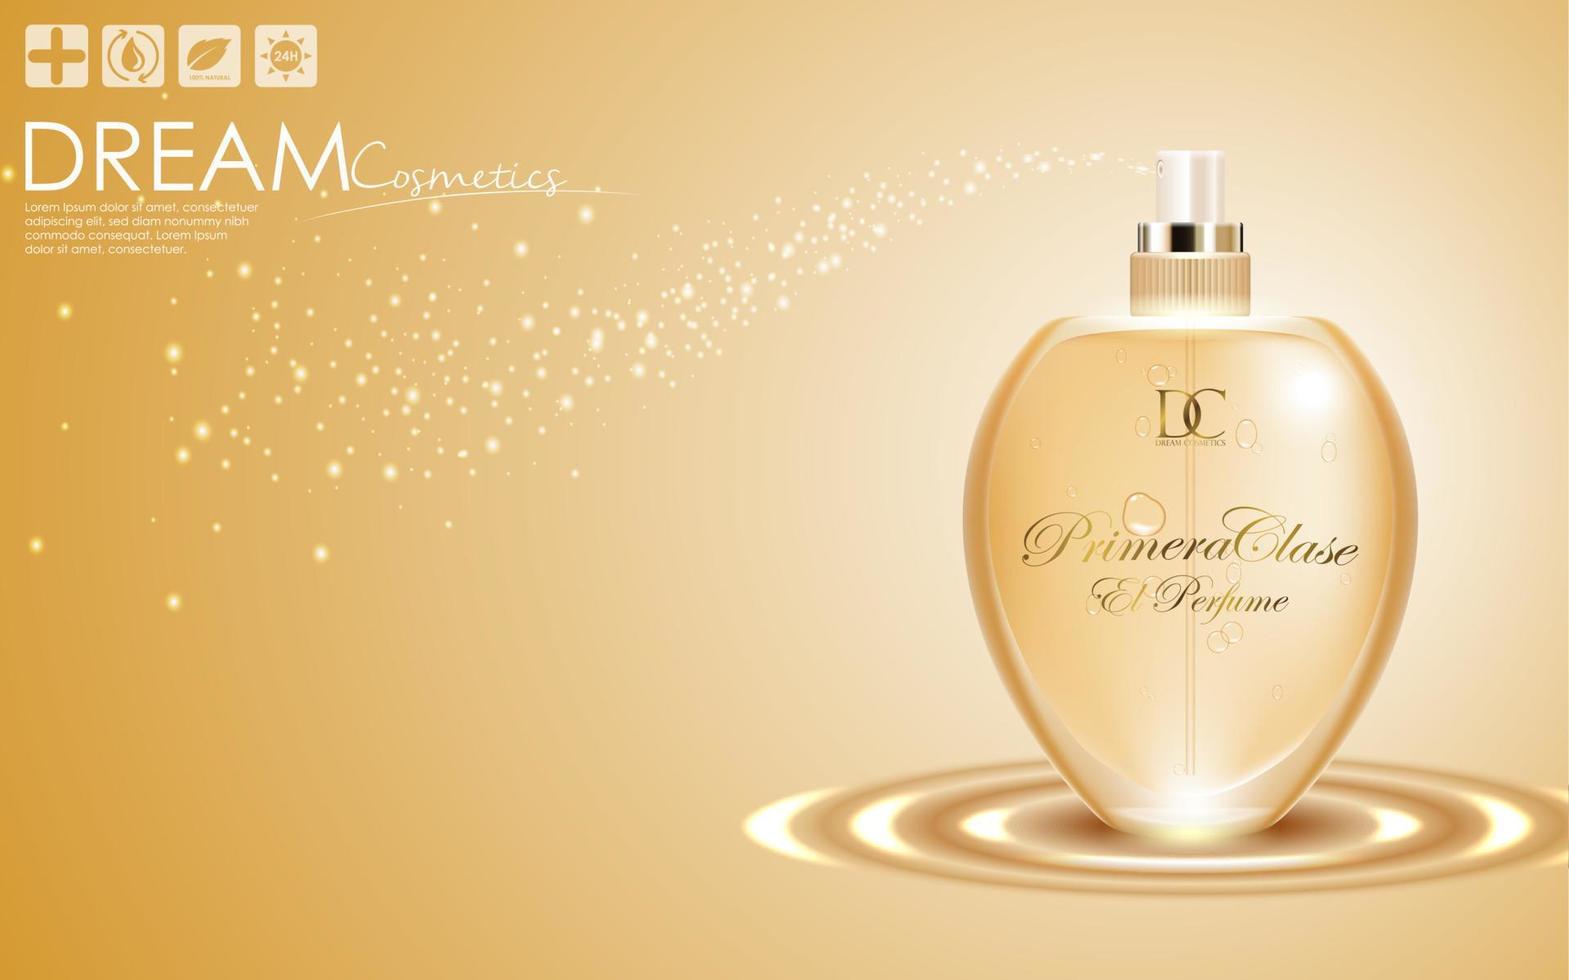 Perfume in a glass bottle on gold background vector